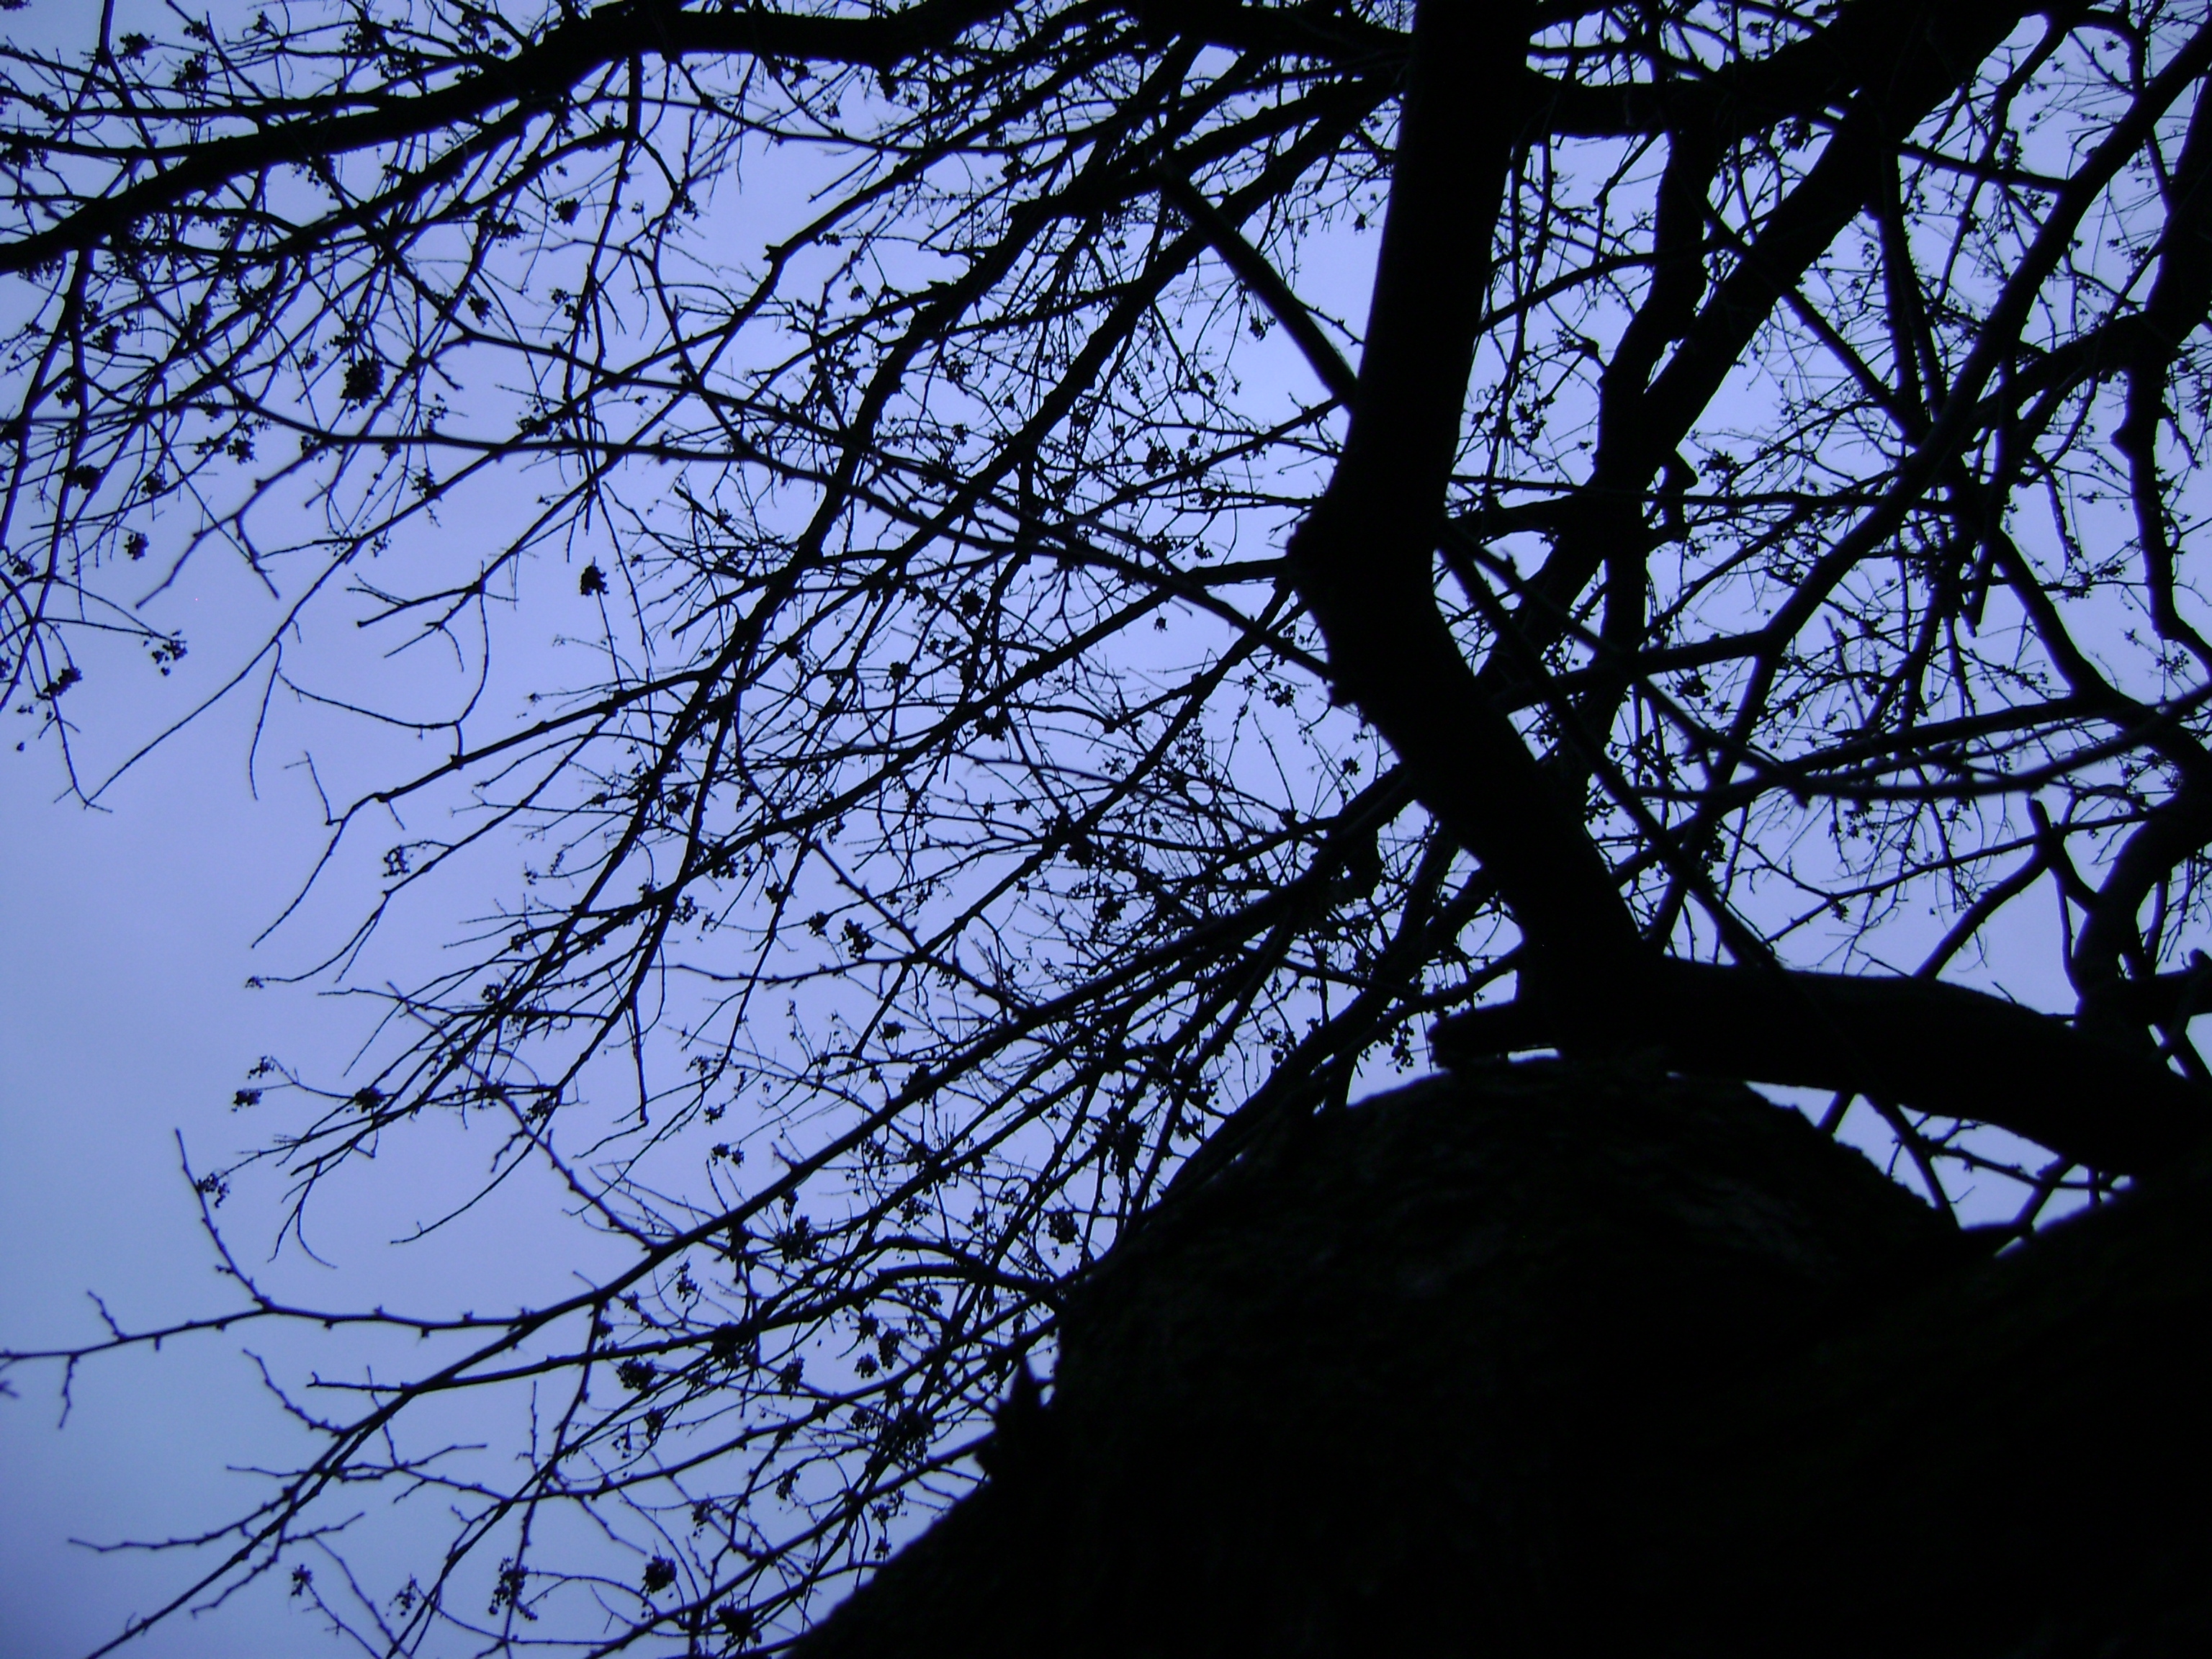 photo of a large, bare, twiggy tree, taken from belowso that the dark branches are in profile against a cloudy sky